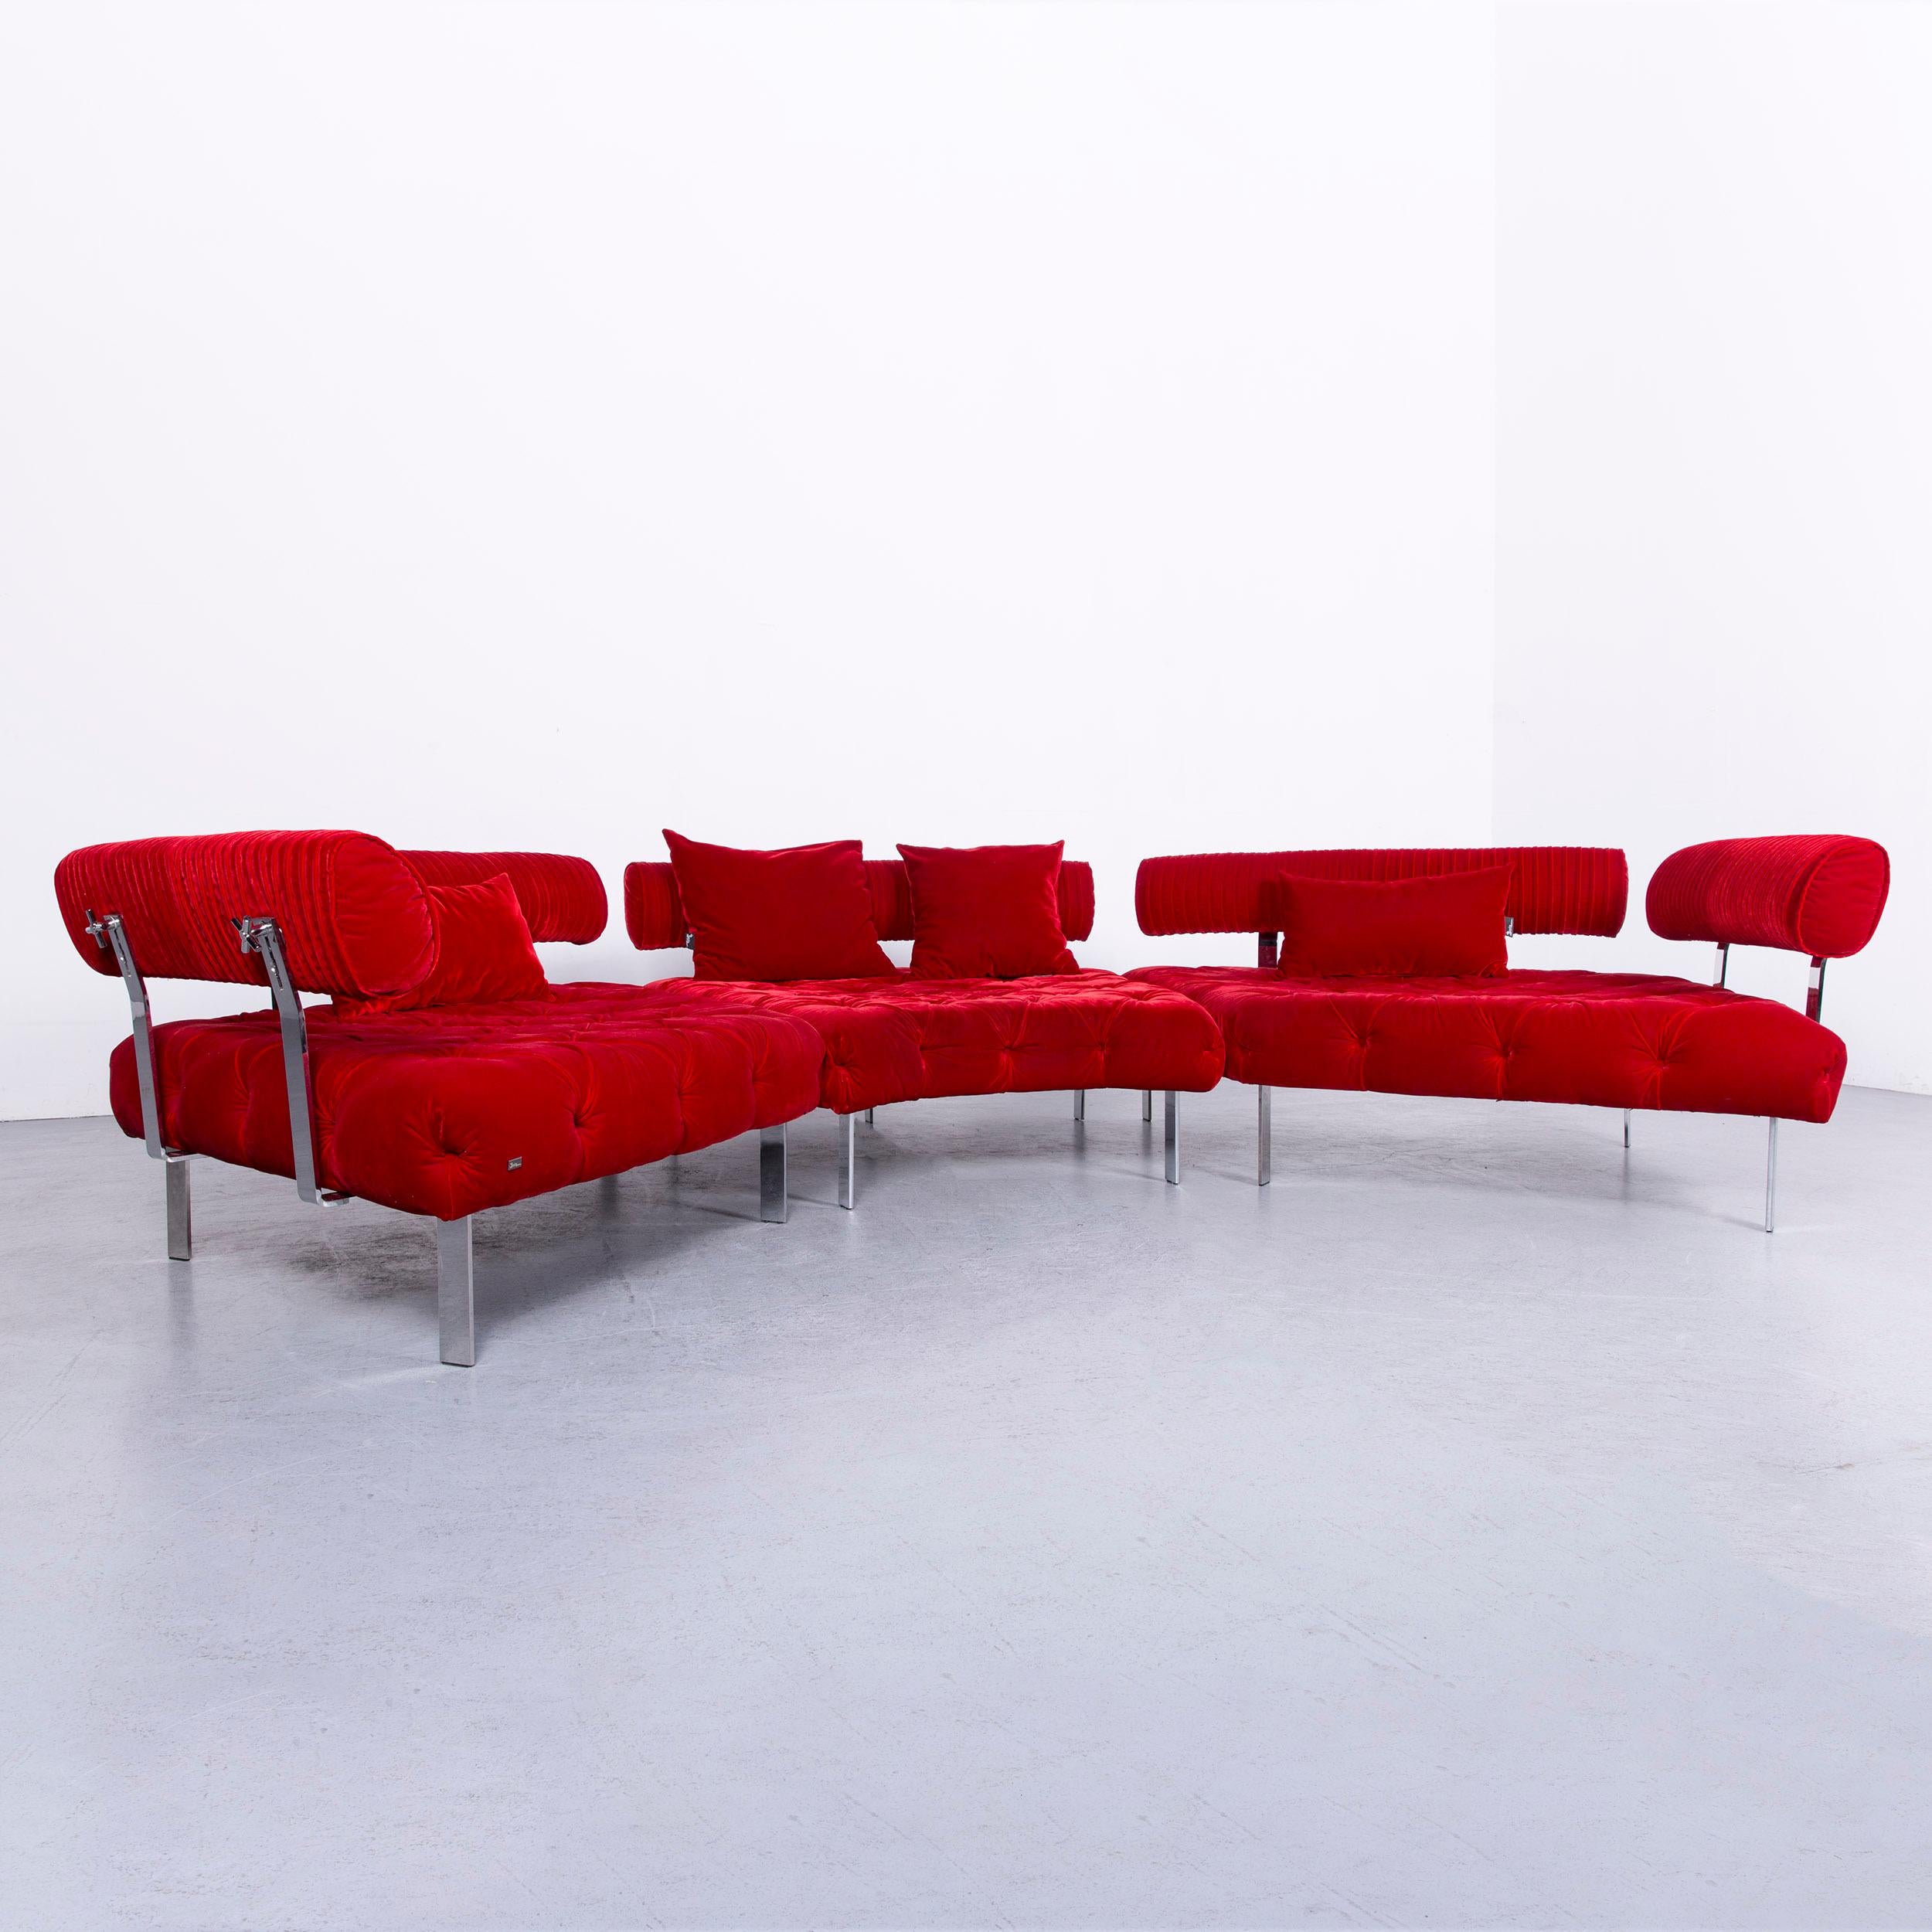 Bretz Highland Designer Fabric Sofa Footstool Set Red Corner Sofa Couch In Good Condition For Sale In Cologne, DE